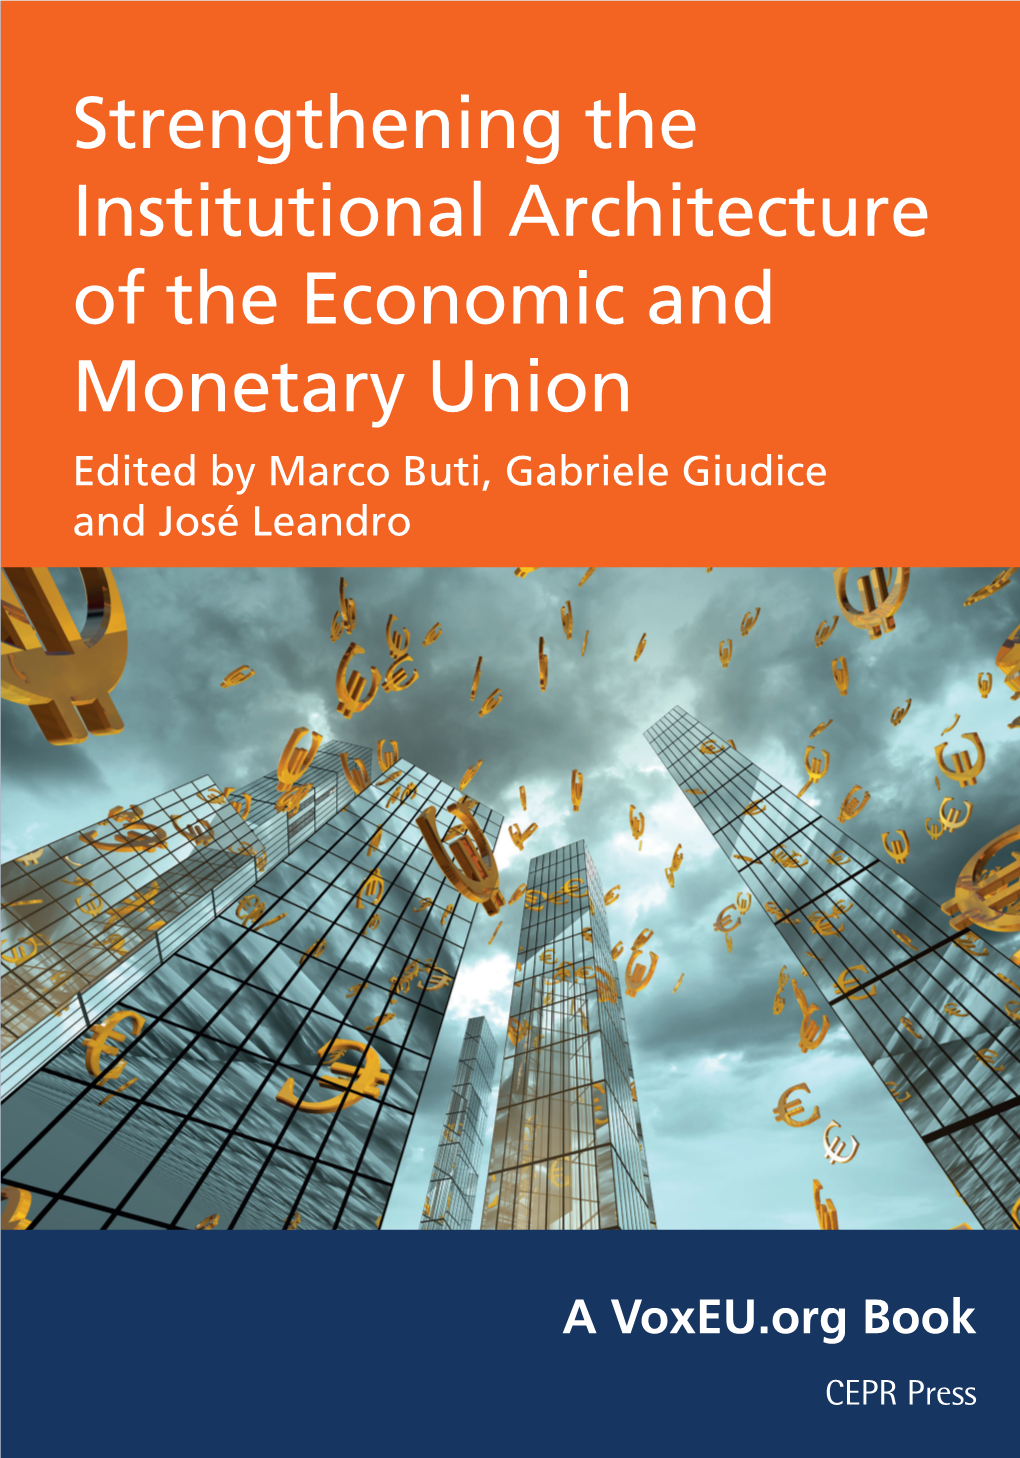 Strengthening the Institutional Architecture of the Economic and Monetary Union